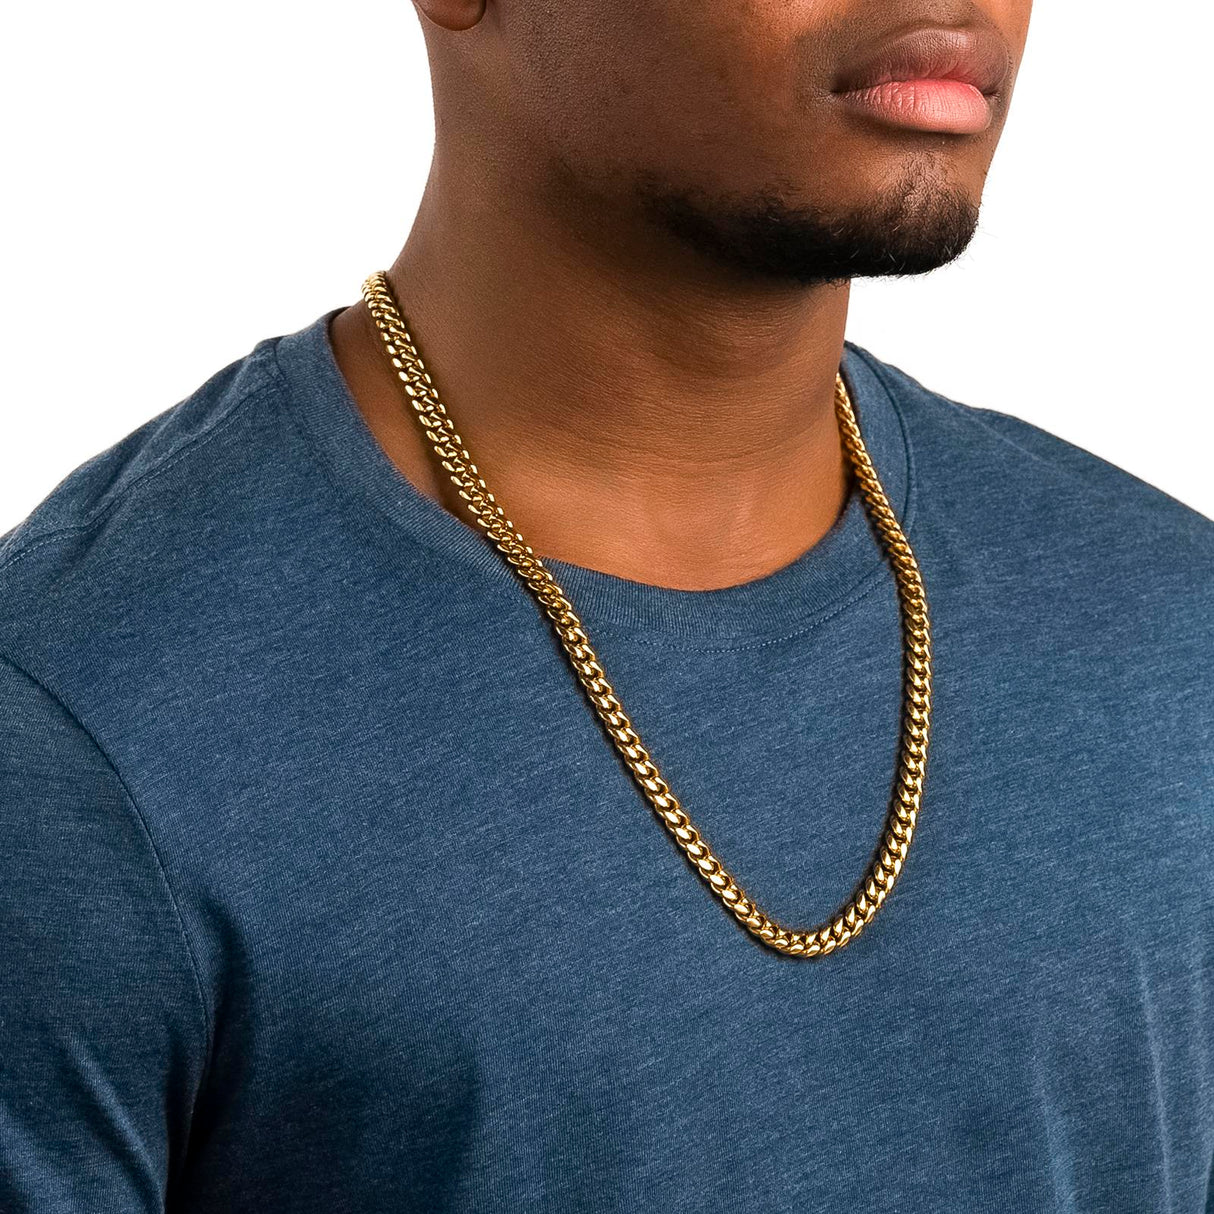 Men's Gold Chain - 8mm Miami Cuban Link - The Gold Gods - 26 inch 1